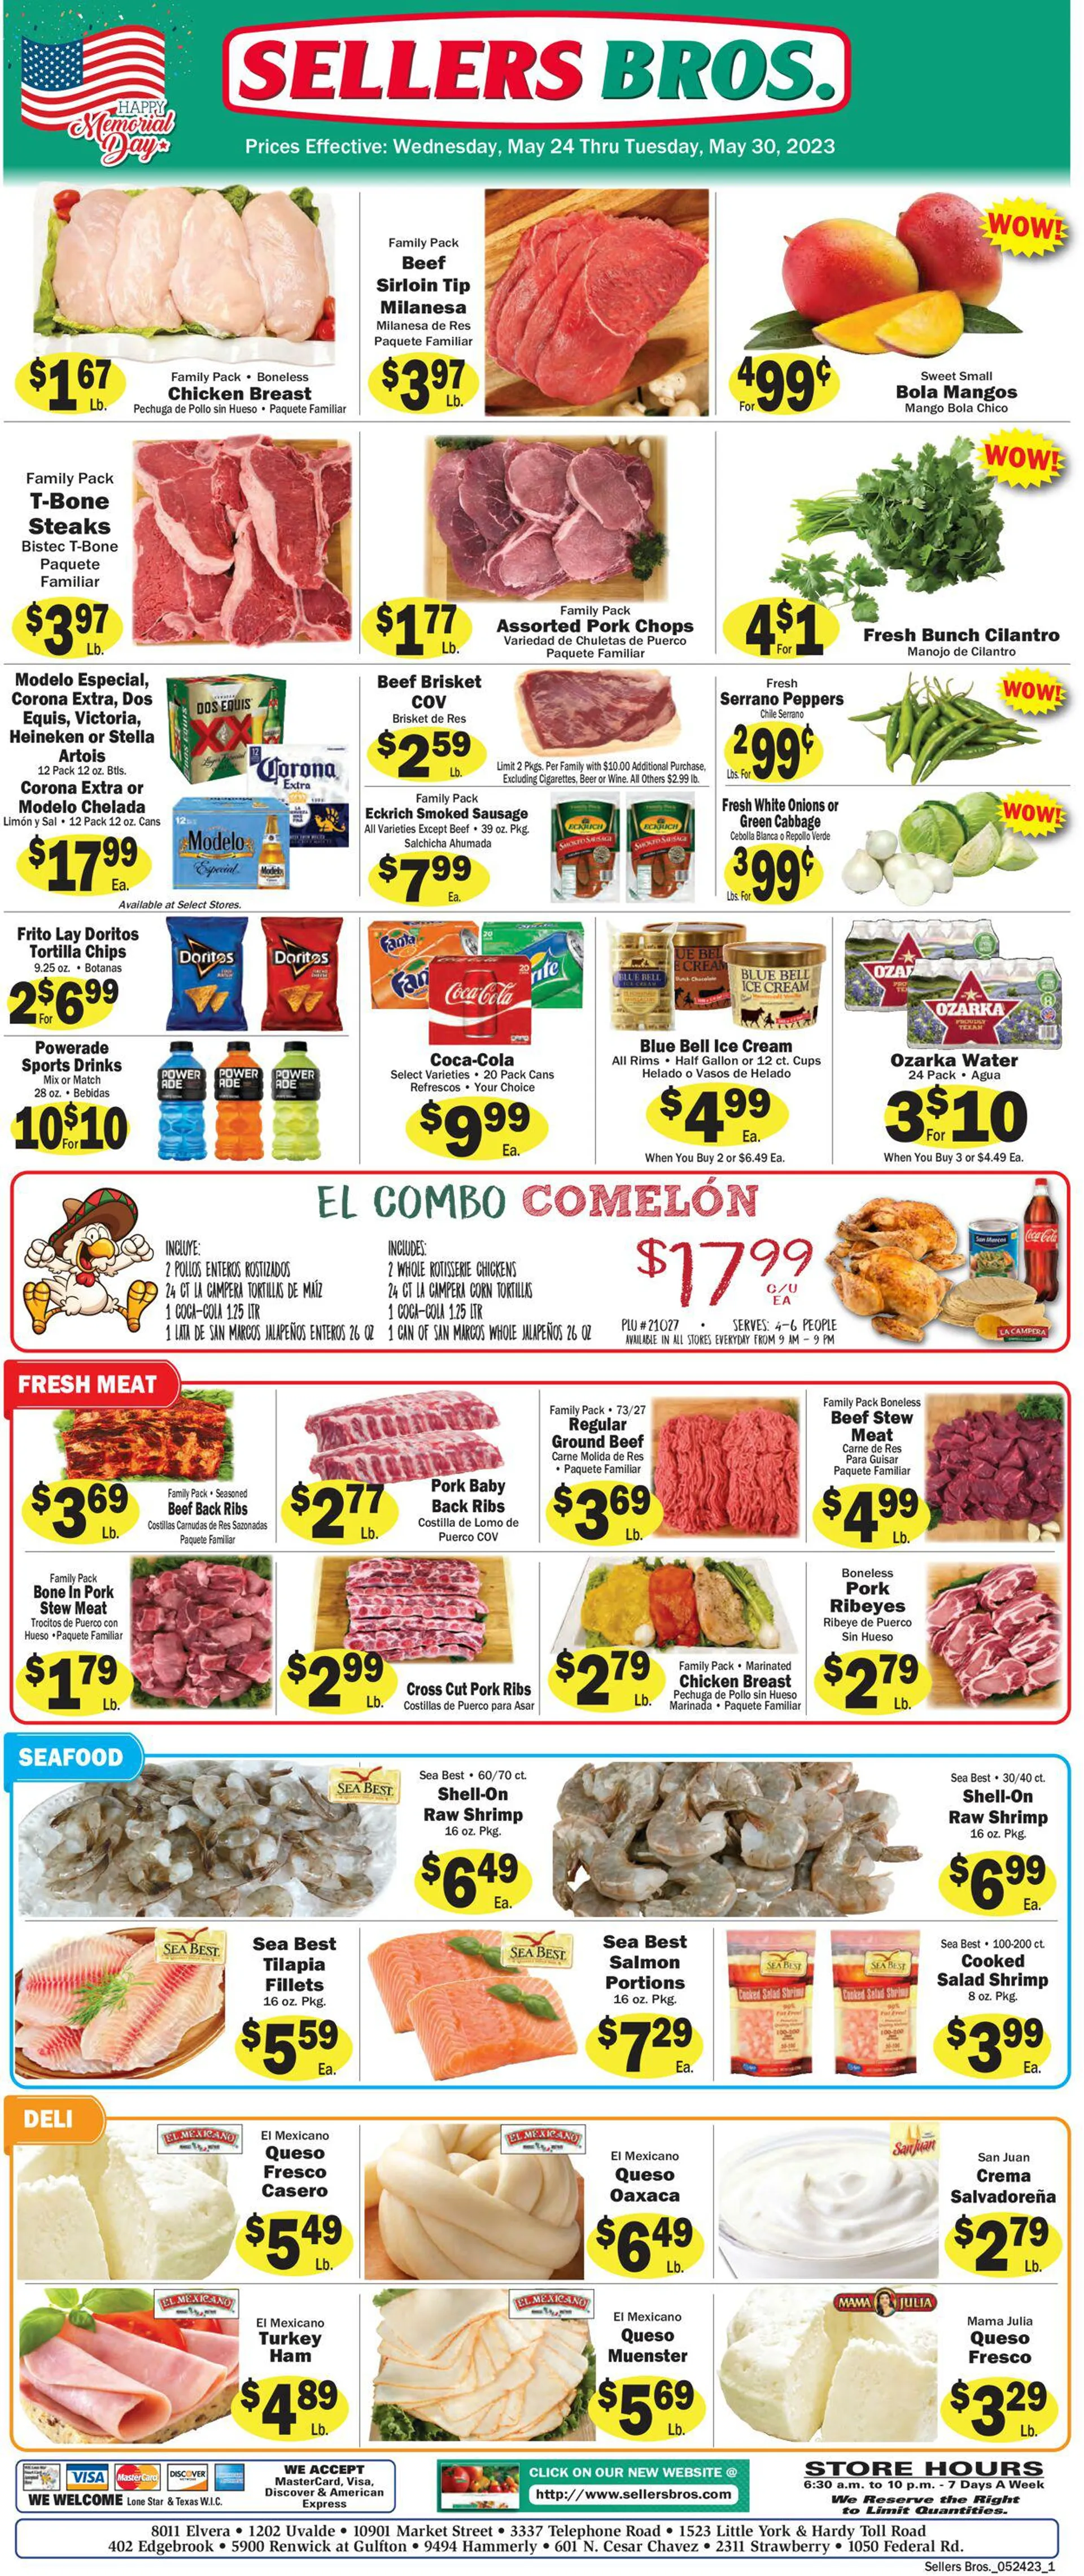 Sellers Bros. Current weekly ad - 1